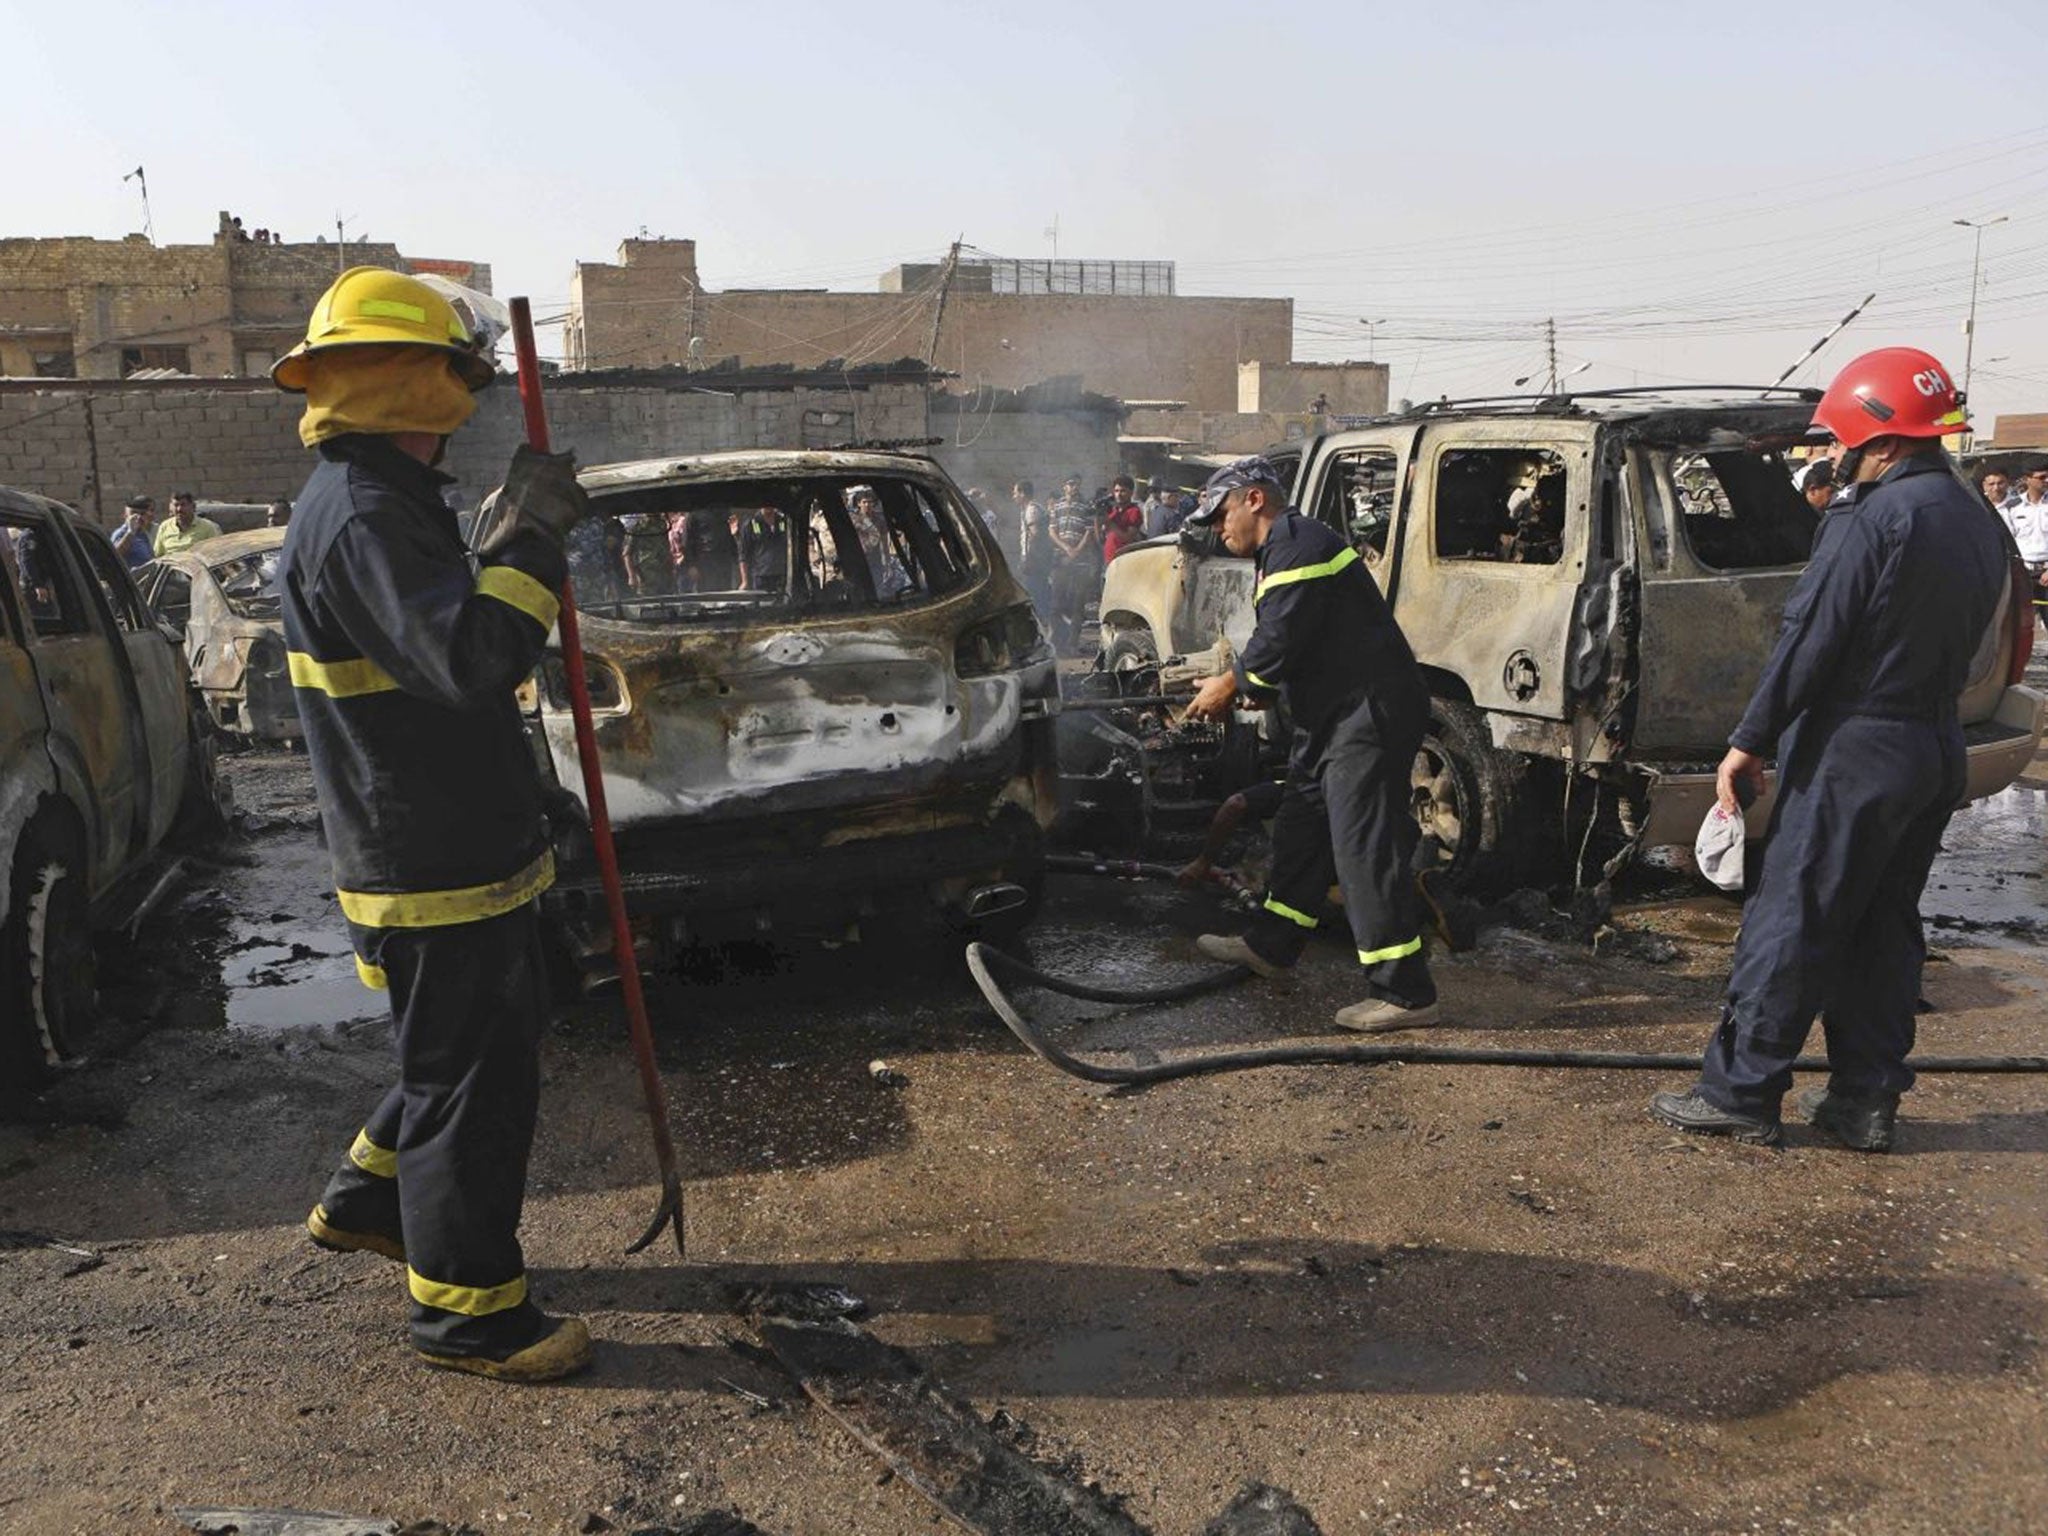 Iraqi firemen work at the scene of a car bomb explosion in the town of Ashar, in Basra